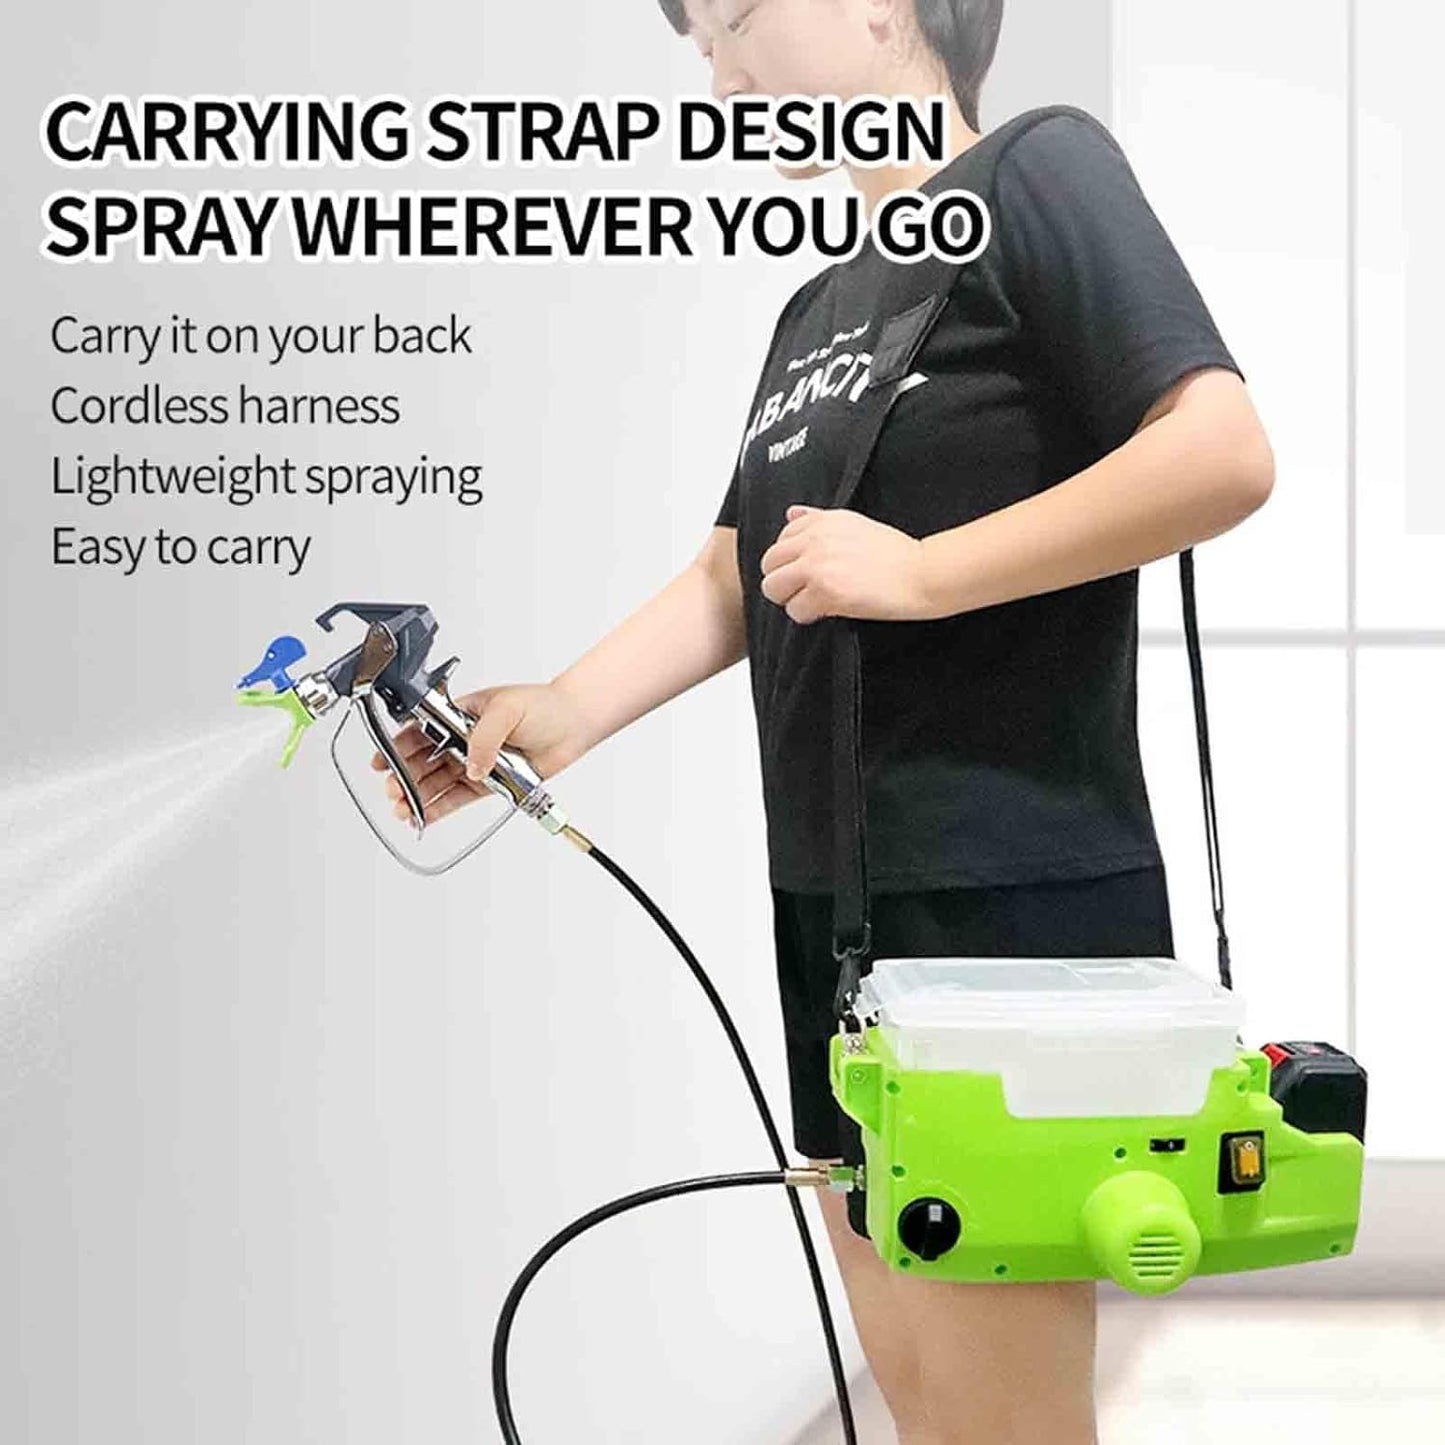 STARQ Backpack Airless Paint Sprayer, 17Mpa Airless Wall Paint Sprayer with Hose, 1.1L/Min Electric Paint Sprayer Gun, 6 Gear Speed Adjustable, for Interior Exterior Furniture/Fence,Green